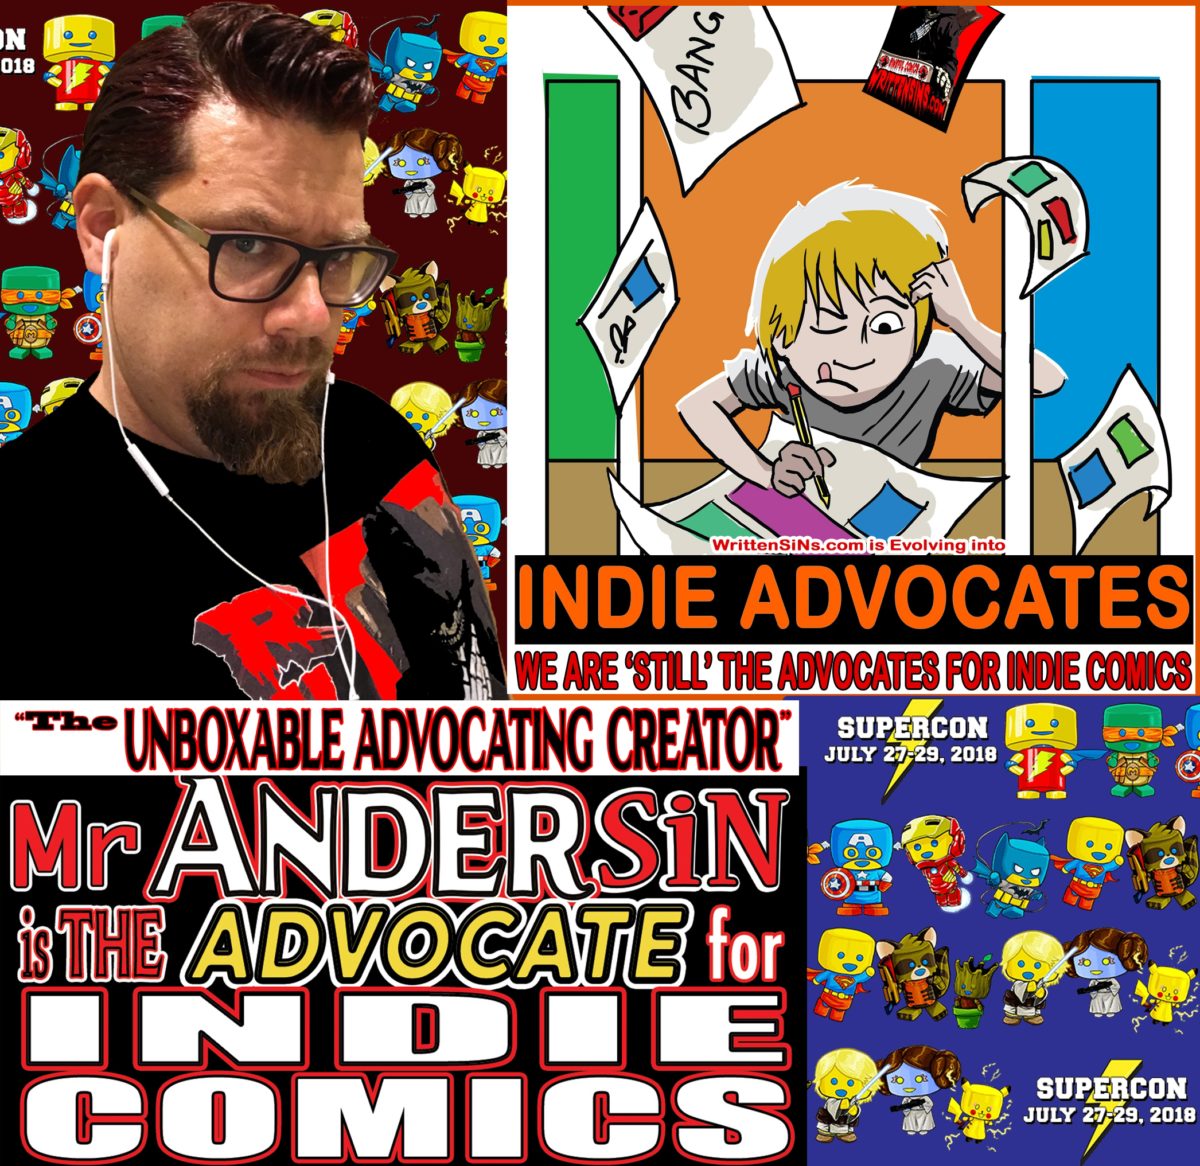 COMIC CON HIGHWAY EXITING with INDIE ADVOCATING  in SOUTH NORTH:: -NC- Mr ANDERSIN SUPERCHARGES the INDIE ADVOCATING in   Raleigh Supercon is July 27-29  .